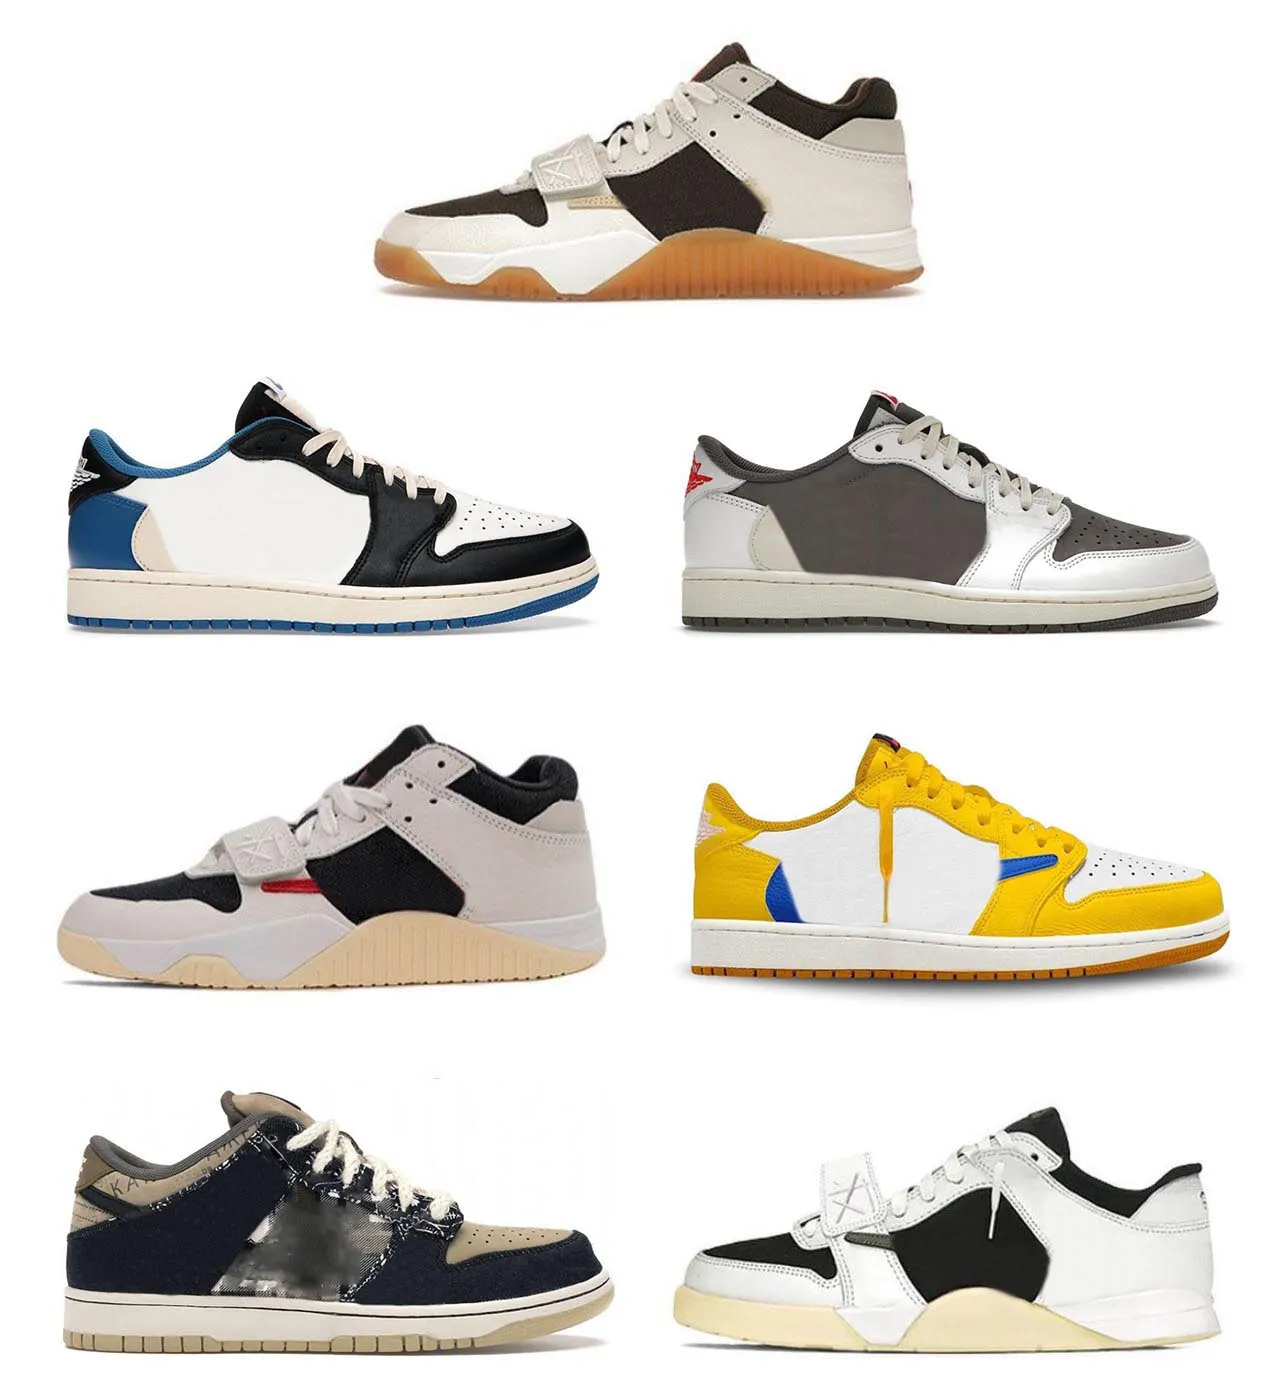 Jumpmans Authentic Low Canary Elkins Shoes Ts Sail Fragment Golf Olive Black Phantom 1s Reverse Mocha Cactus Jack Men Women Sports Sneakers With Box